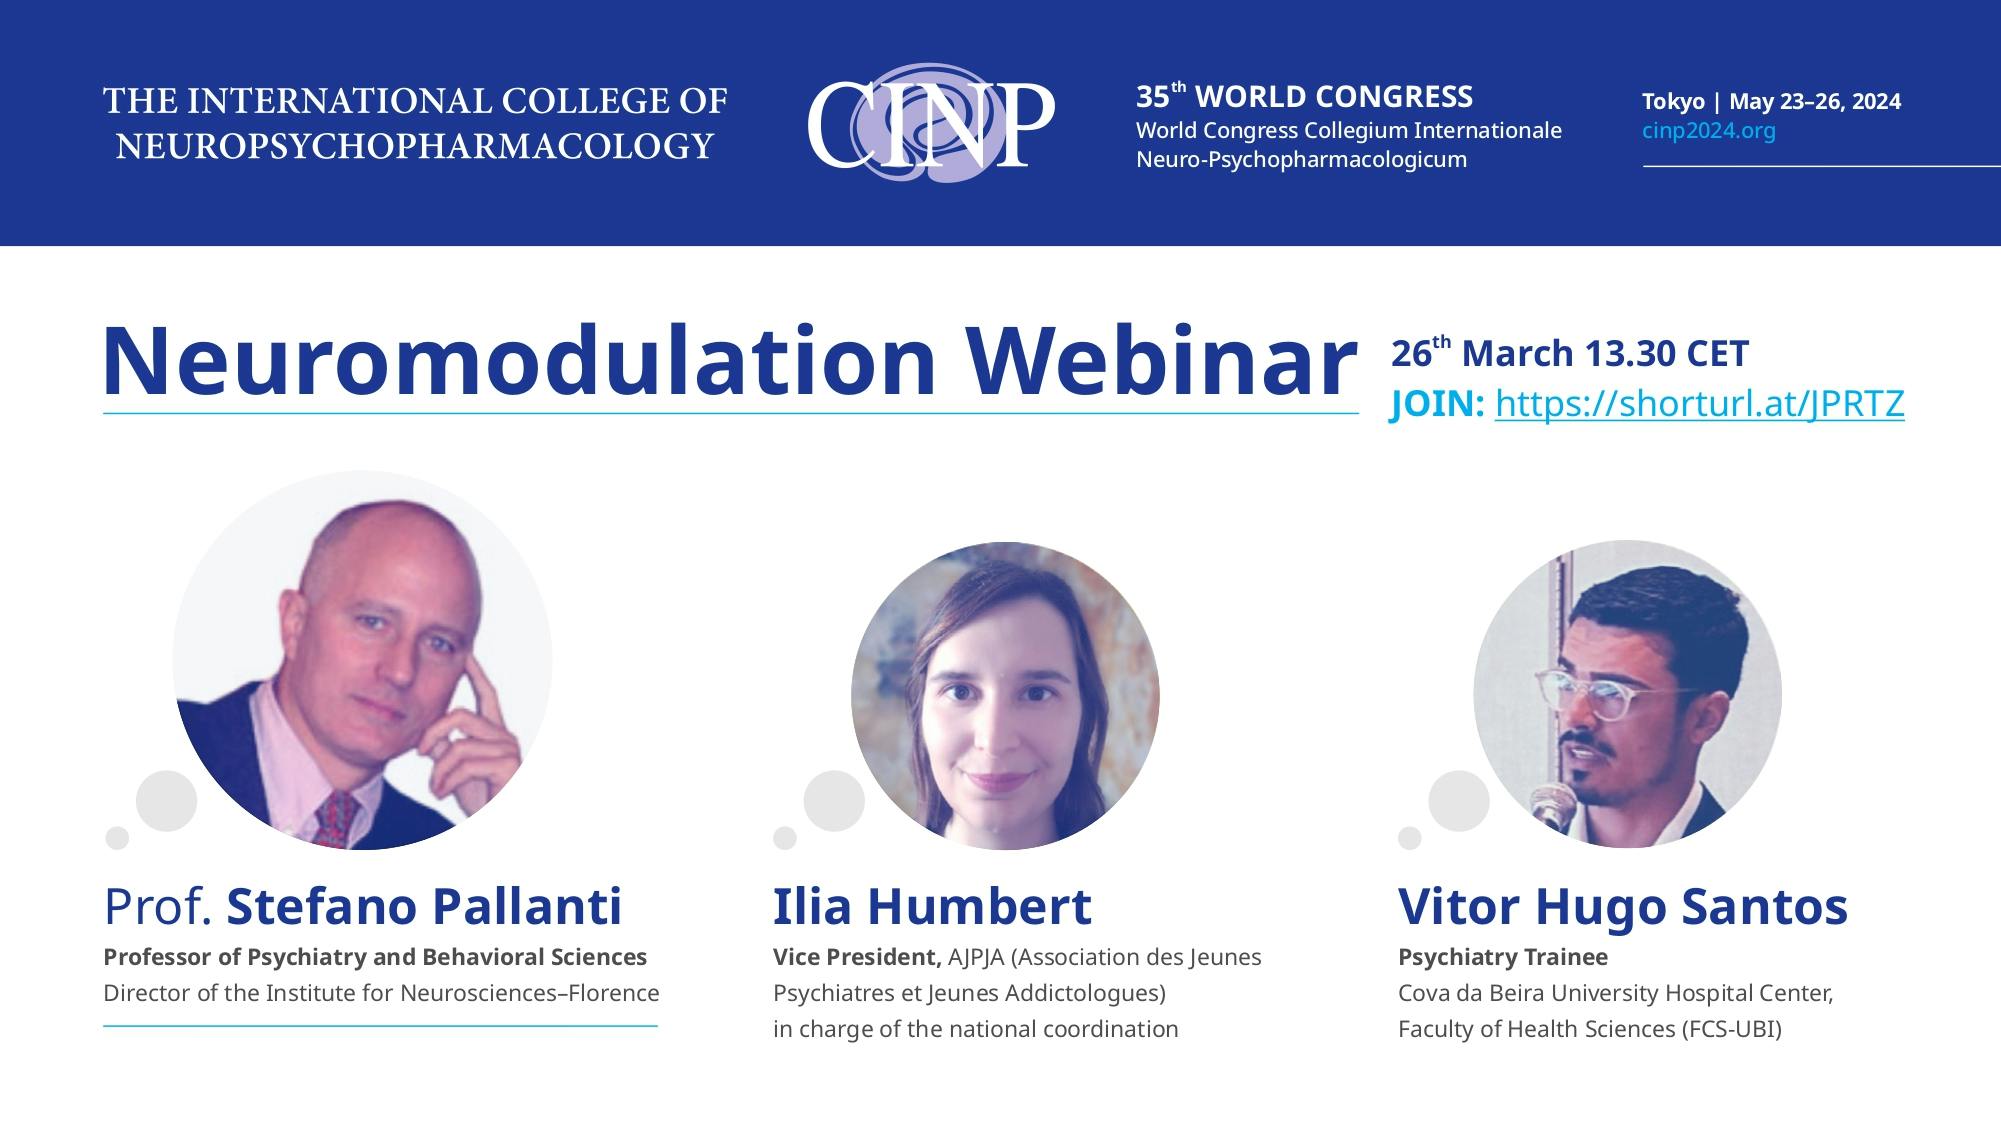 Promotional poster of the Webinar on Neuromodulation delivered online with Dr. Stefano Pallanti at the 35th World Congress of the International College of Neuropsychopharmacology (CINP)